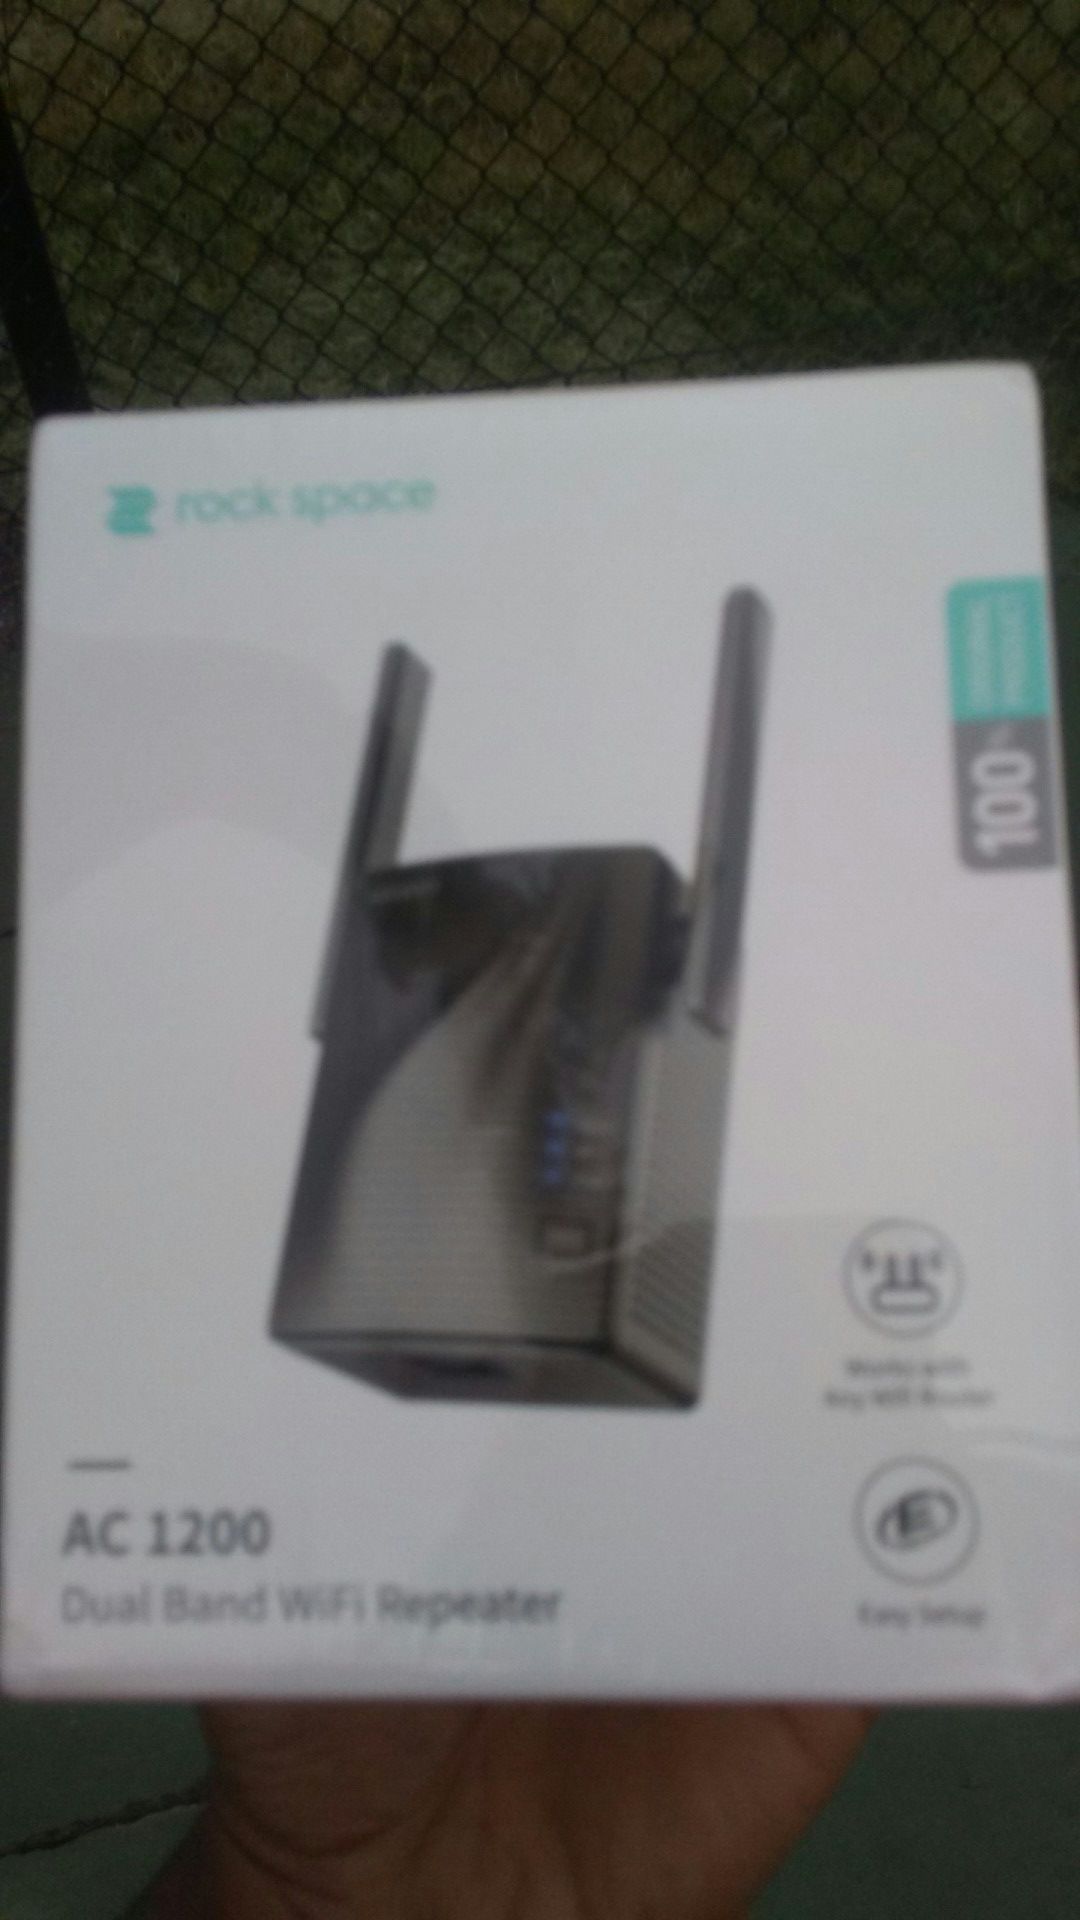 Rock Space AC 1200 Dual Band Wifi repeater